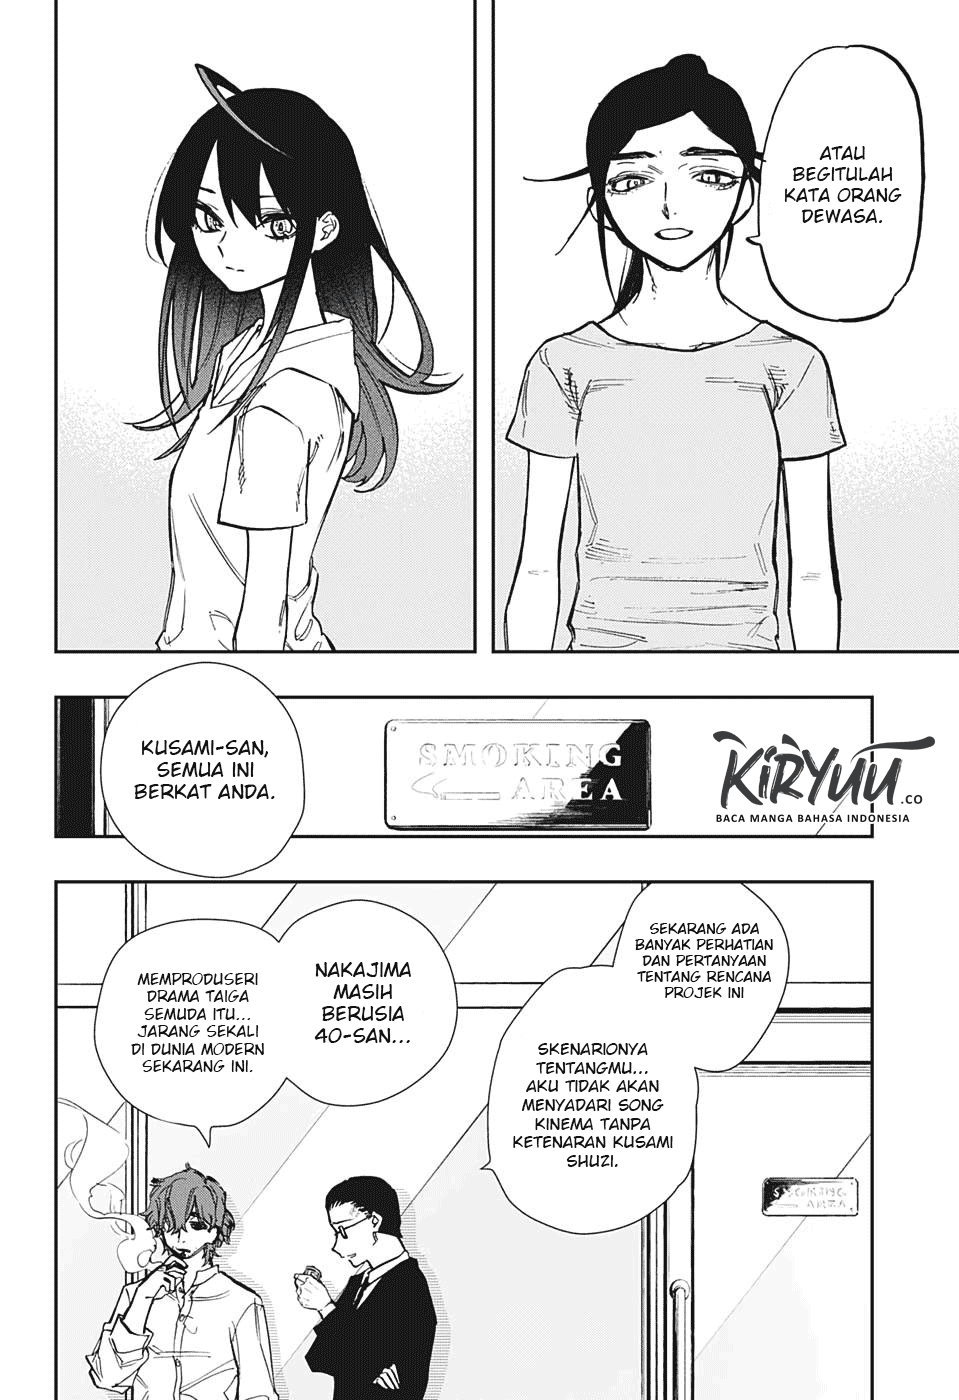 ACT-AGE Chapter 123-end